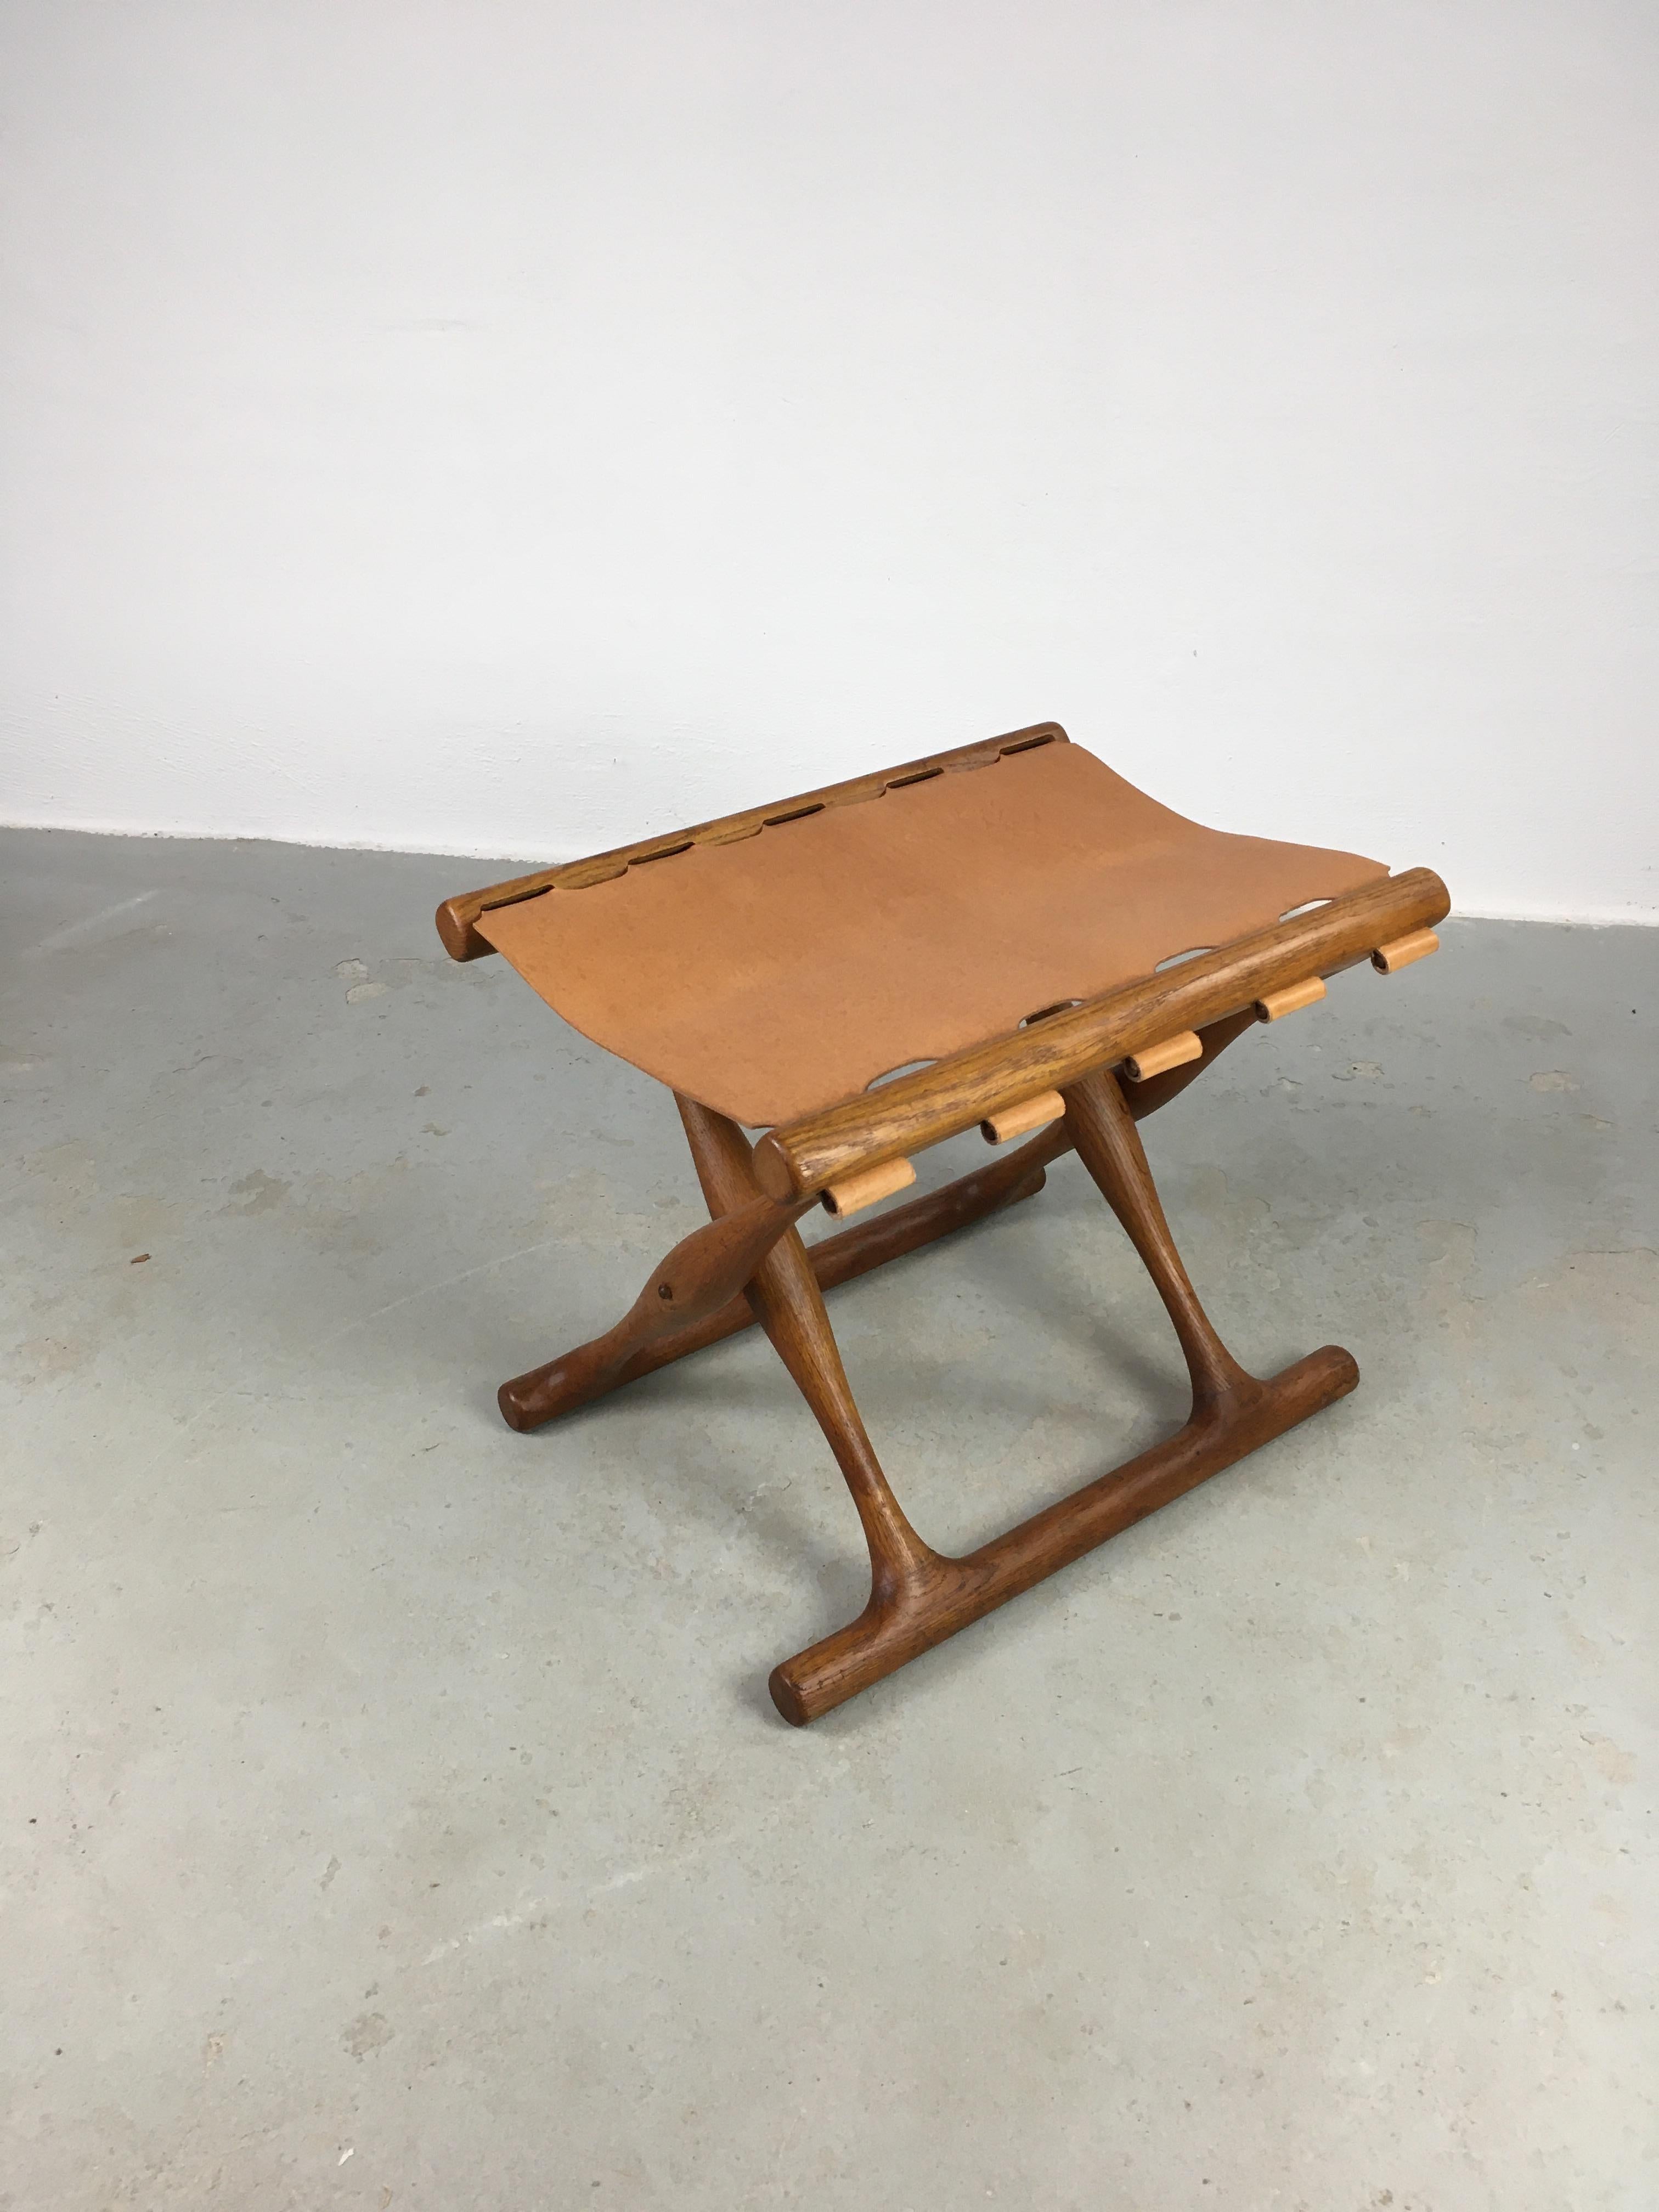 1960's Danish Poul Hundevad folding footstool in oak and leather seat

Poul Hundevads footstool was an almost exact copy of of the almost intact 3500 years old 